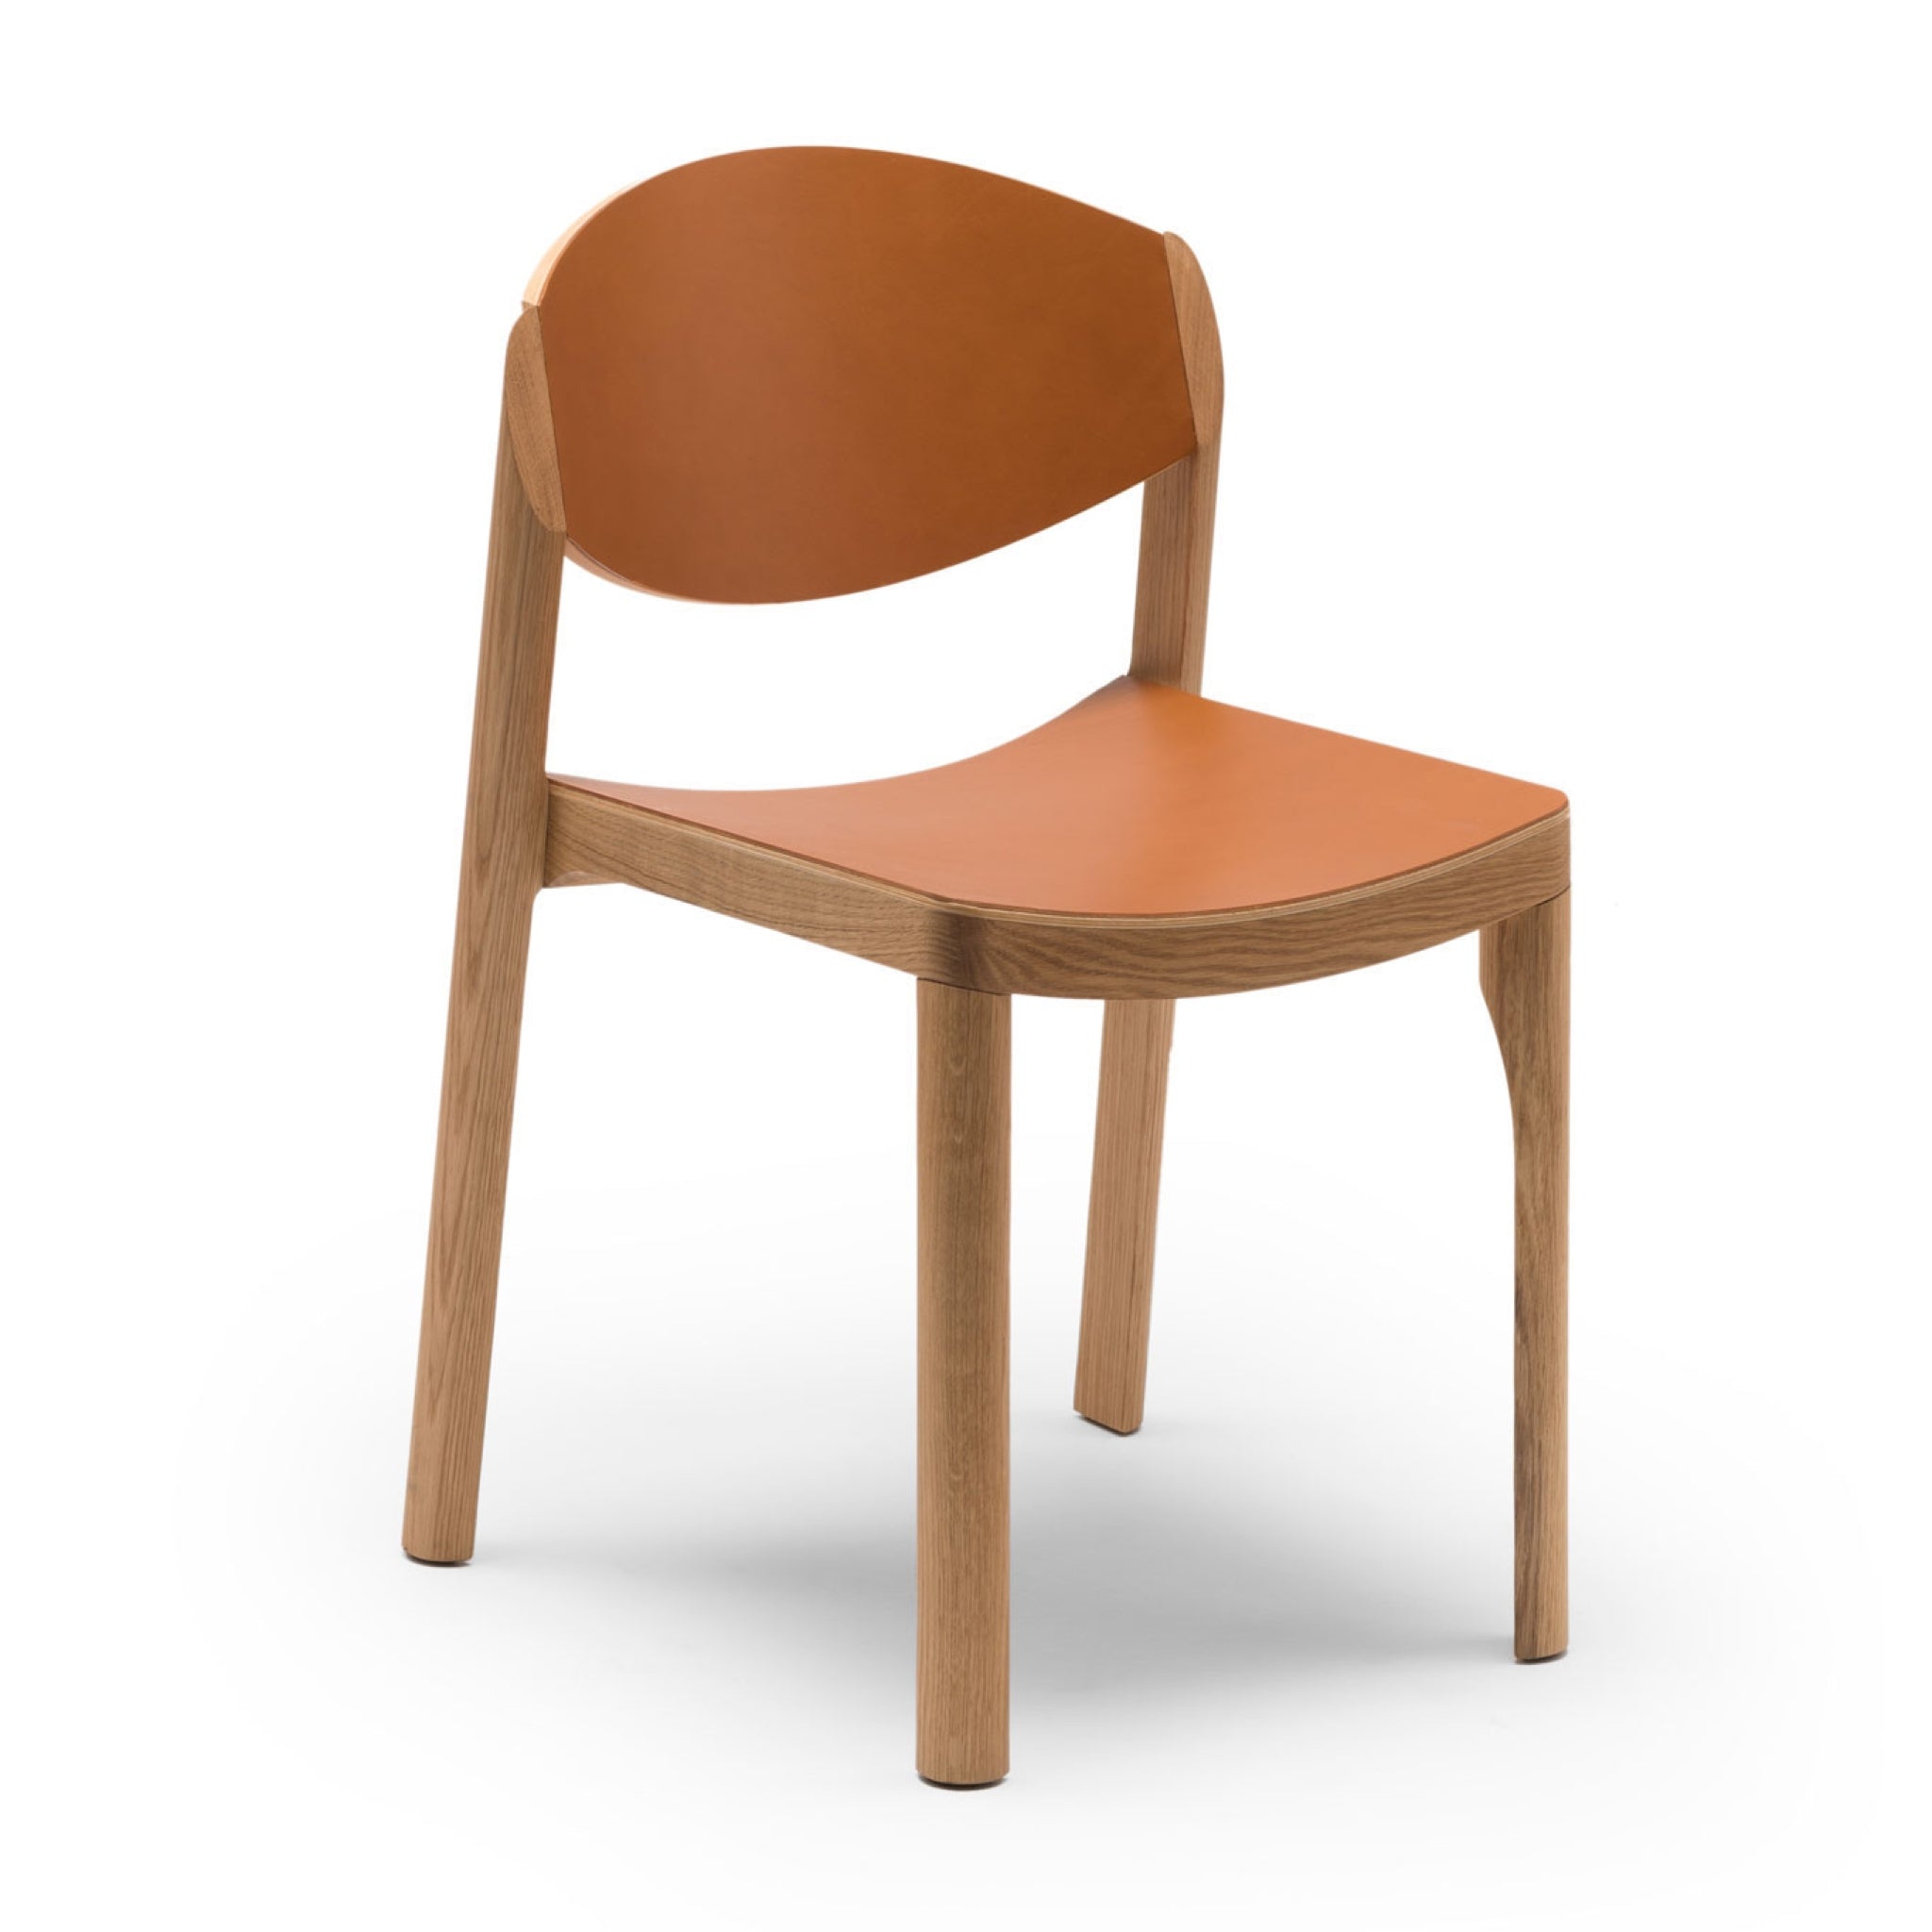 Mauro Chair by Established & Sons